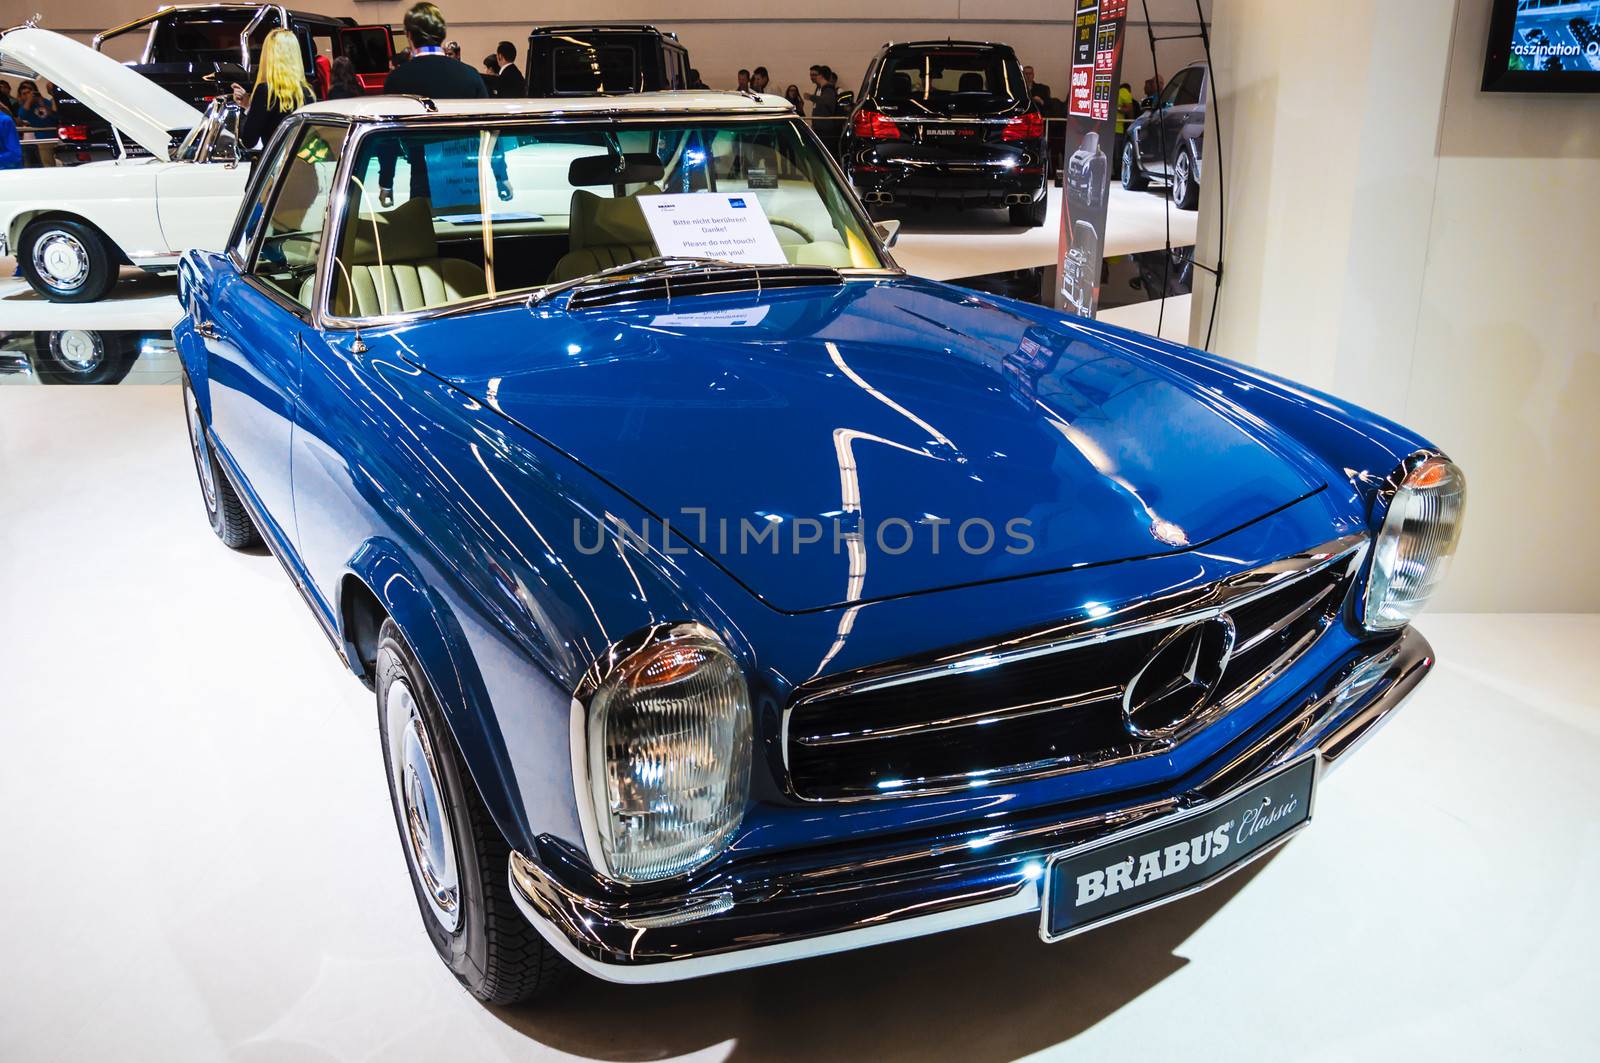 FRANKFURT - SEPT 21: Mercedes Benz SL Pagode Brabus Classic presented as world premiere at the 65th IAA (Internationale Automobil Ausstellung) on September 21, 2013 in Frankfurt, Germany